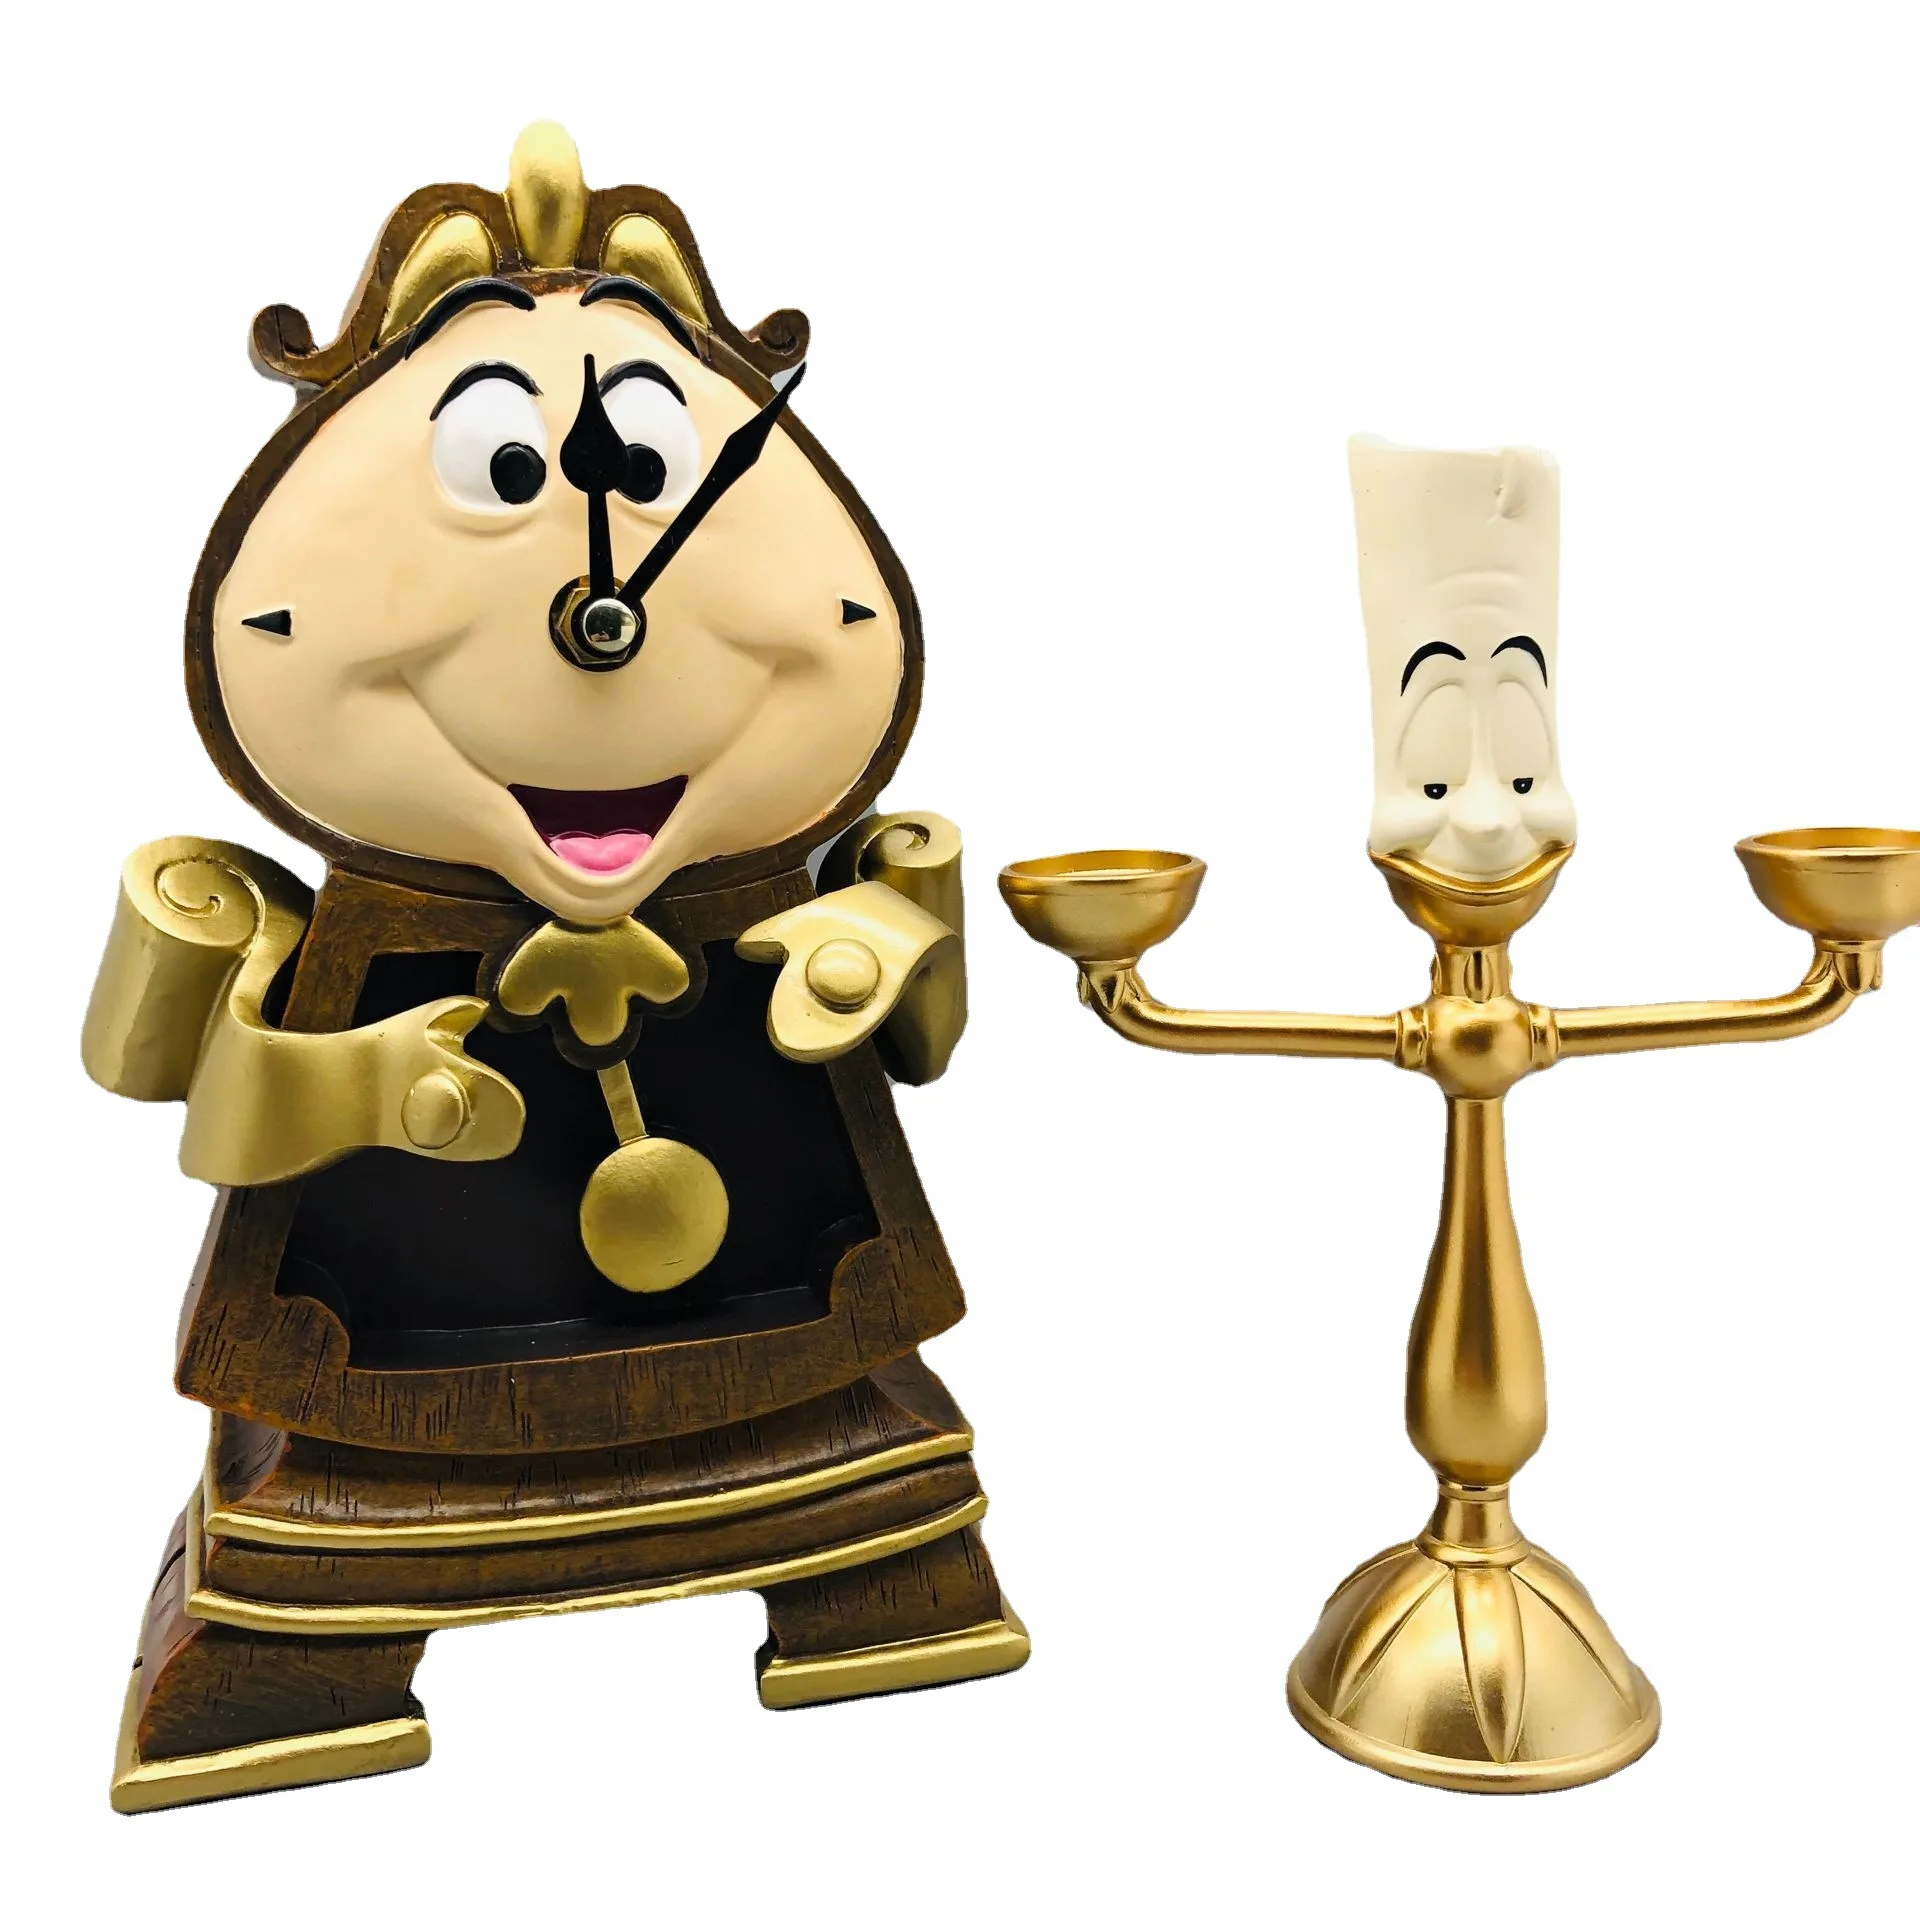 Disney Beauty and the Beast Cogsworth Mr Clock 24cm Action Figure Decoration Collection Figurine kid Toy PVC model for children